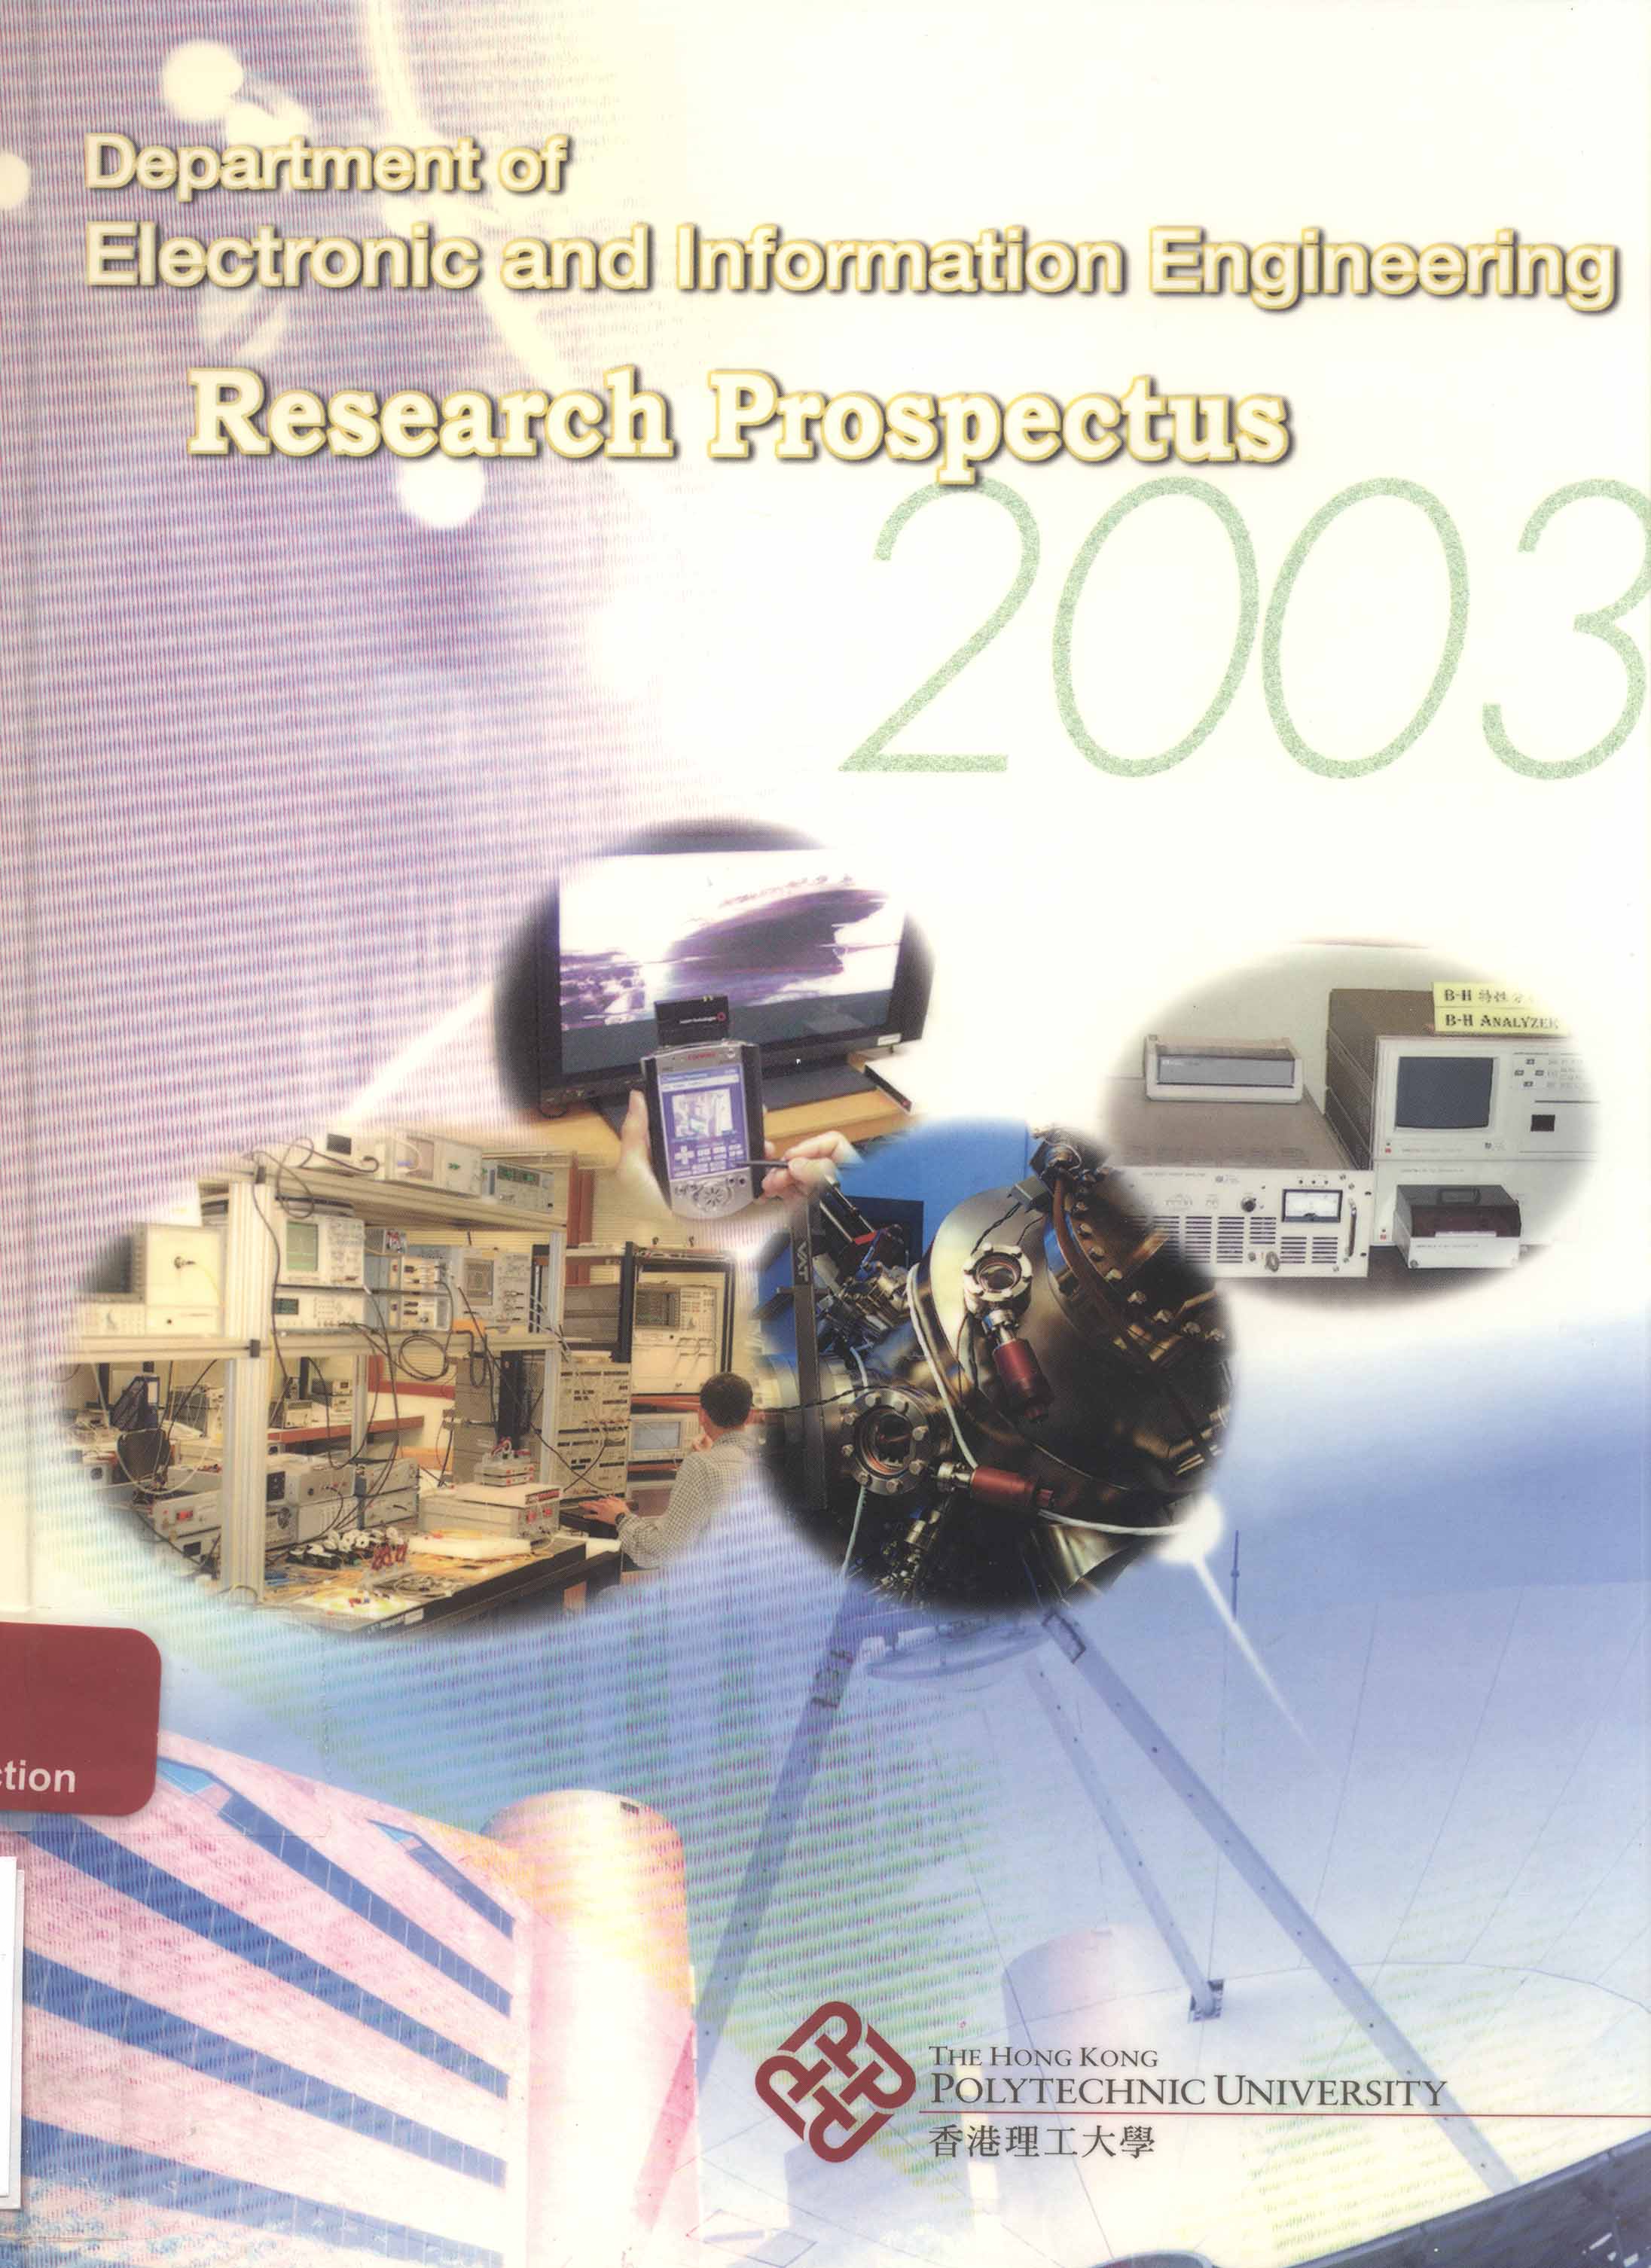 Research Prospectus 2003 (Dept. of Electronic and Information Engineering)